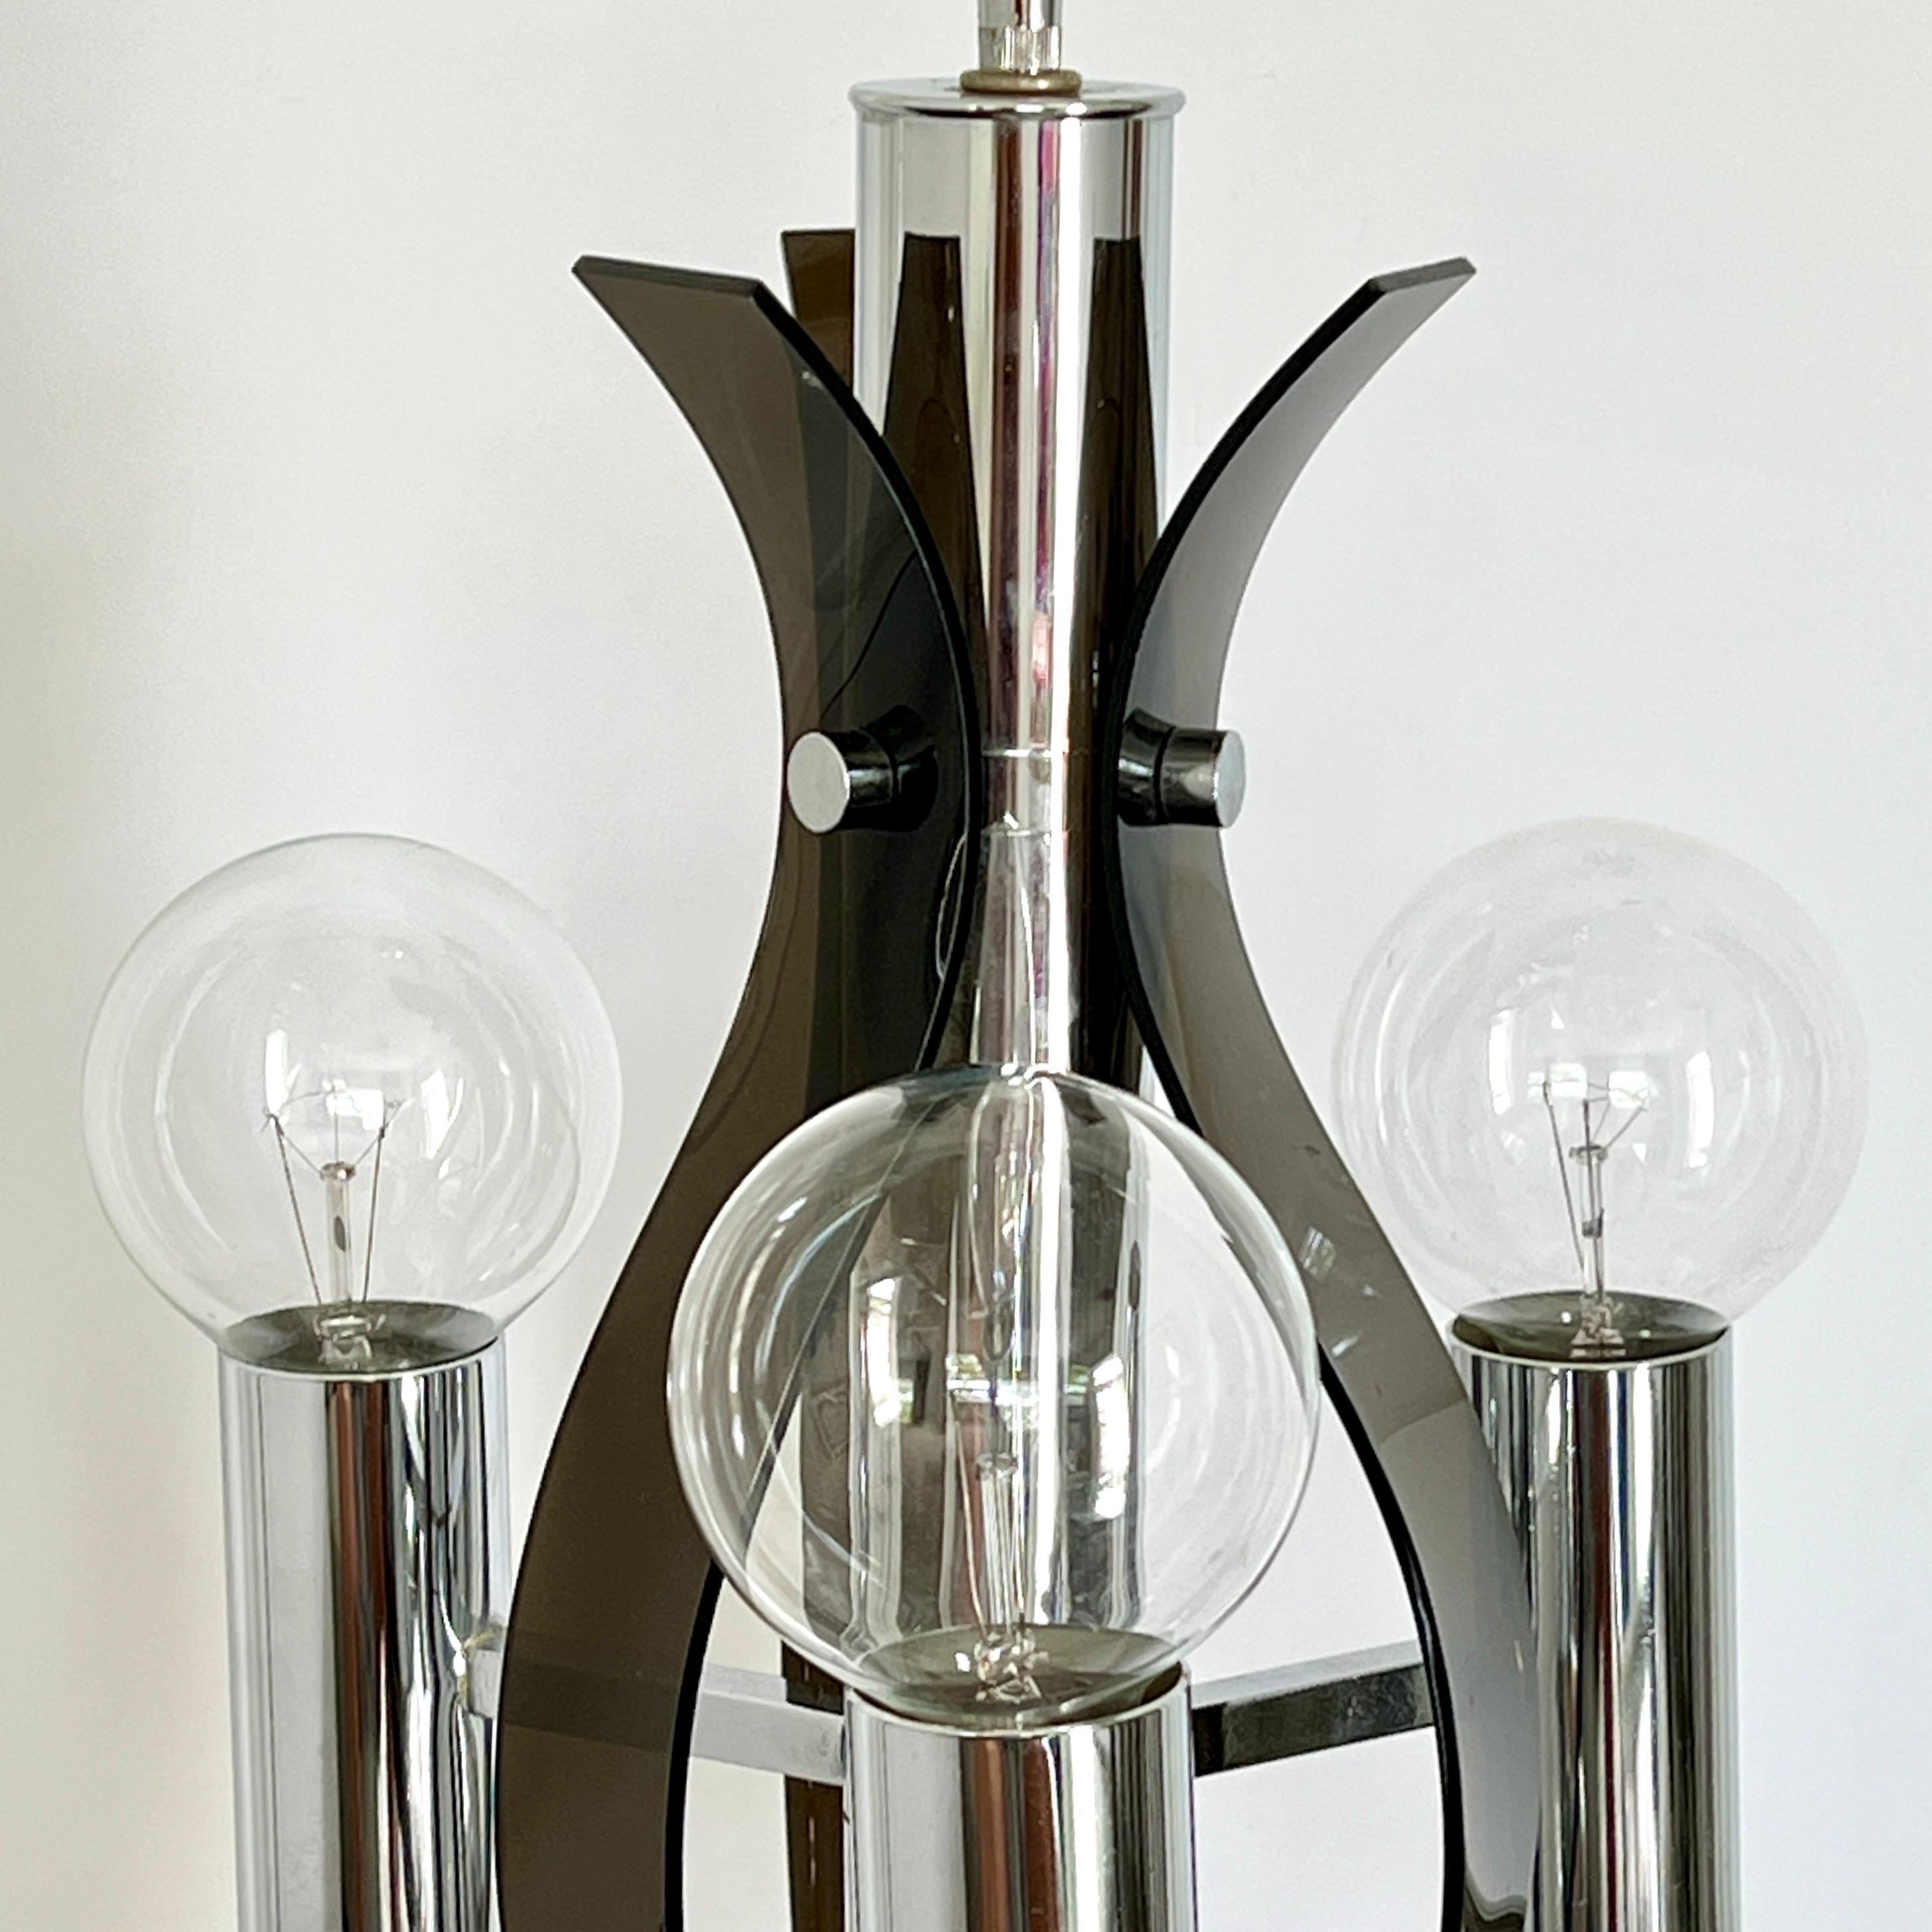 Sculptural Chandelier in Chrome and Smoked Lucite, Robert Sonneman, c. 1970's In Good Condition For Sale In Fort Lauderdale, FL